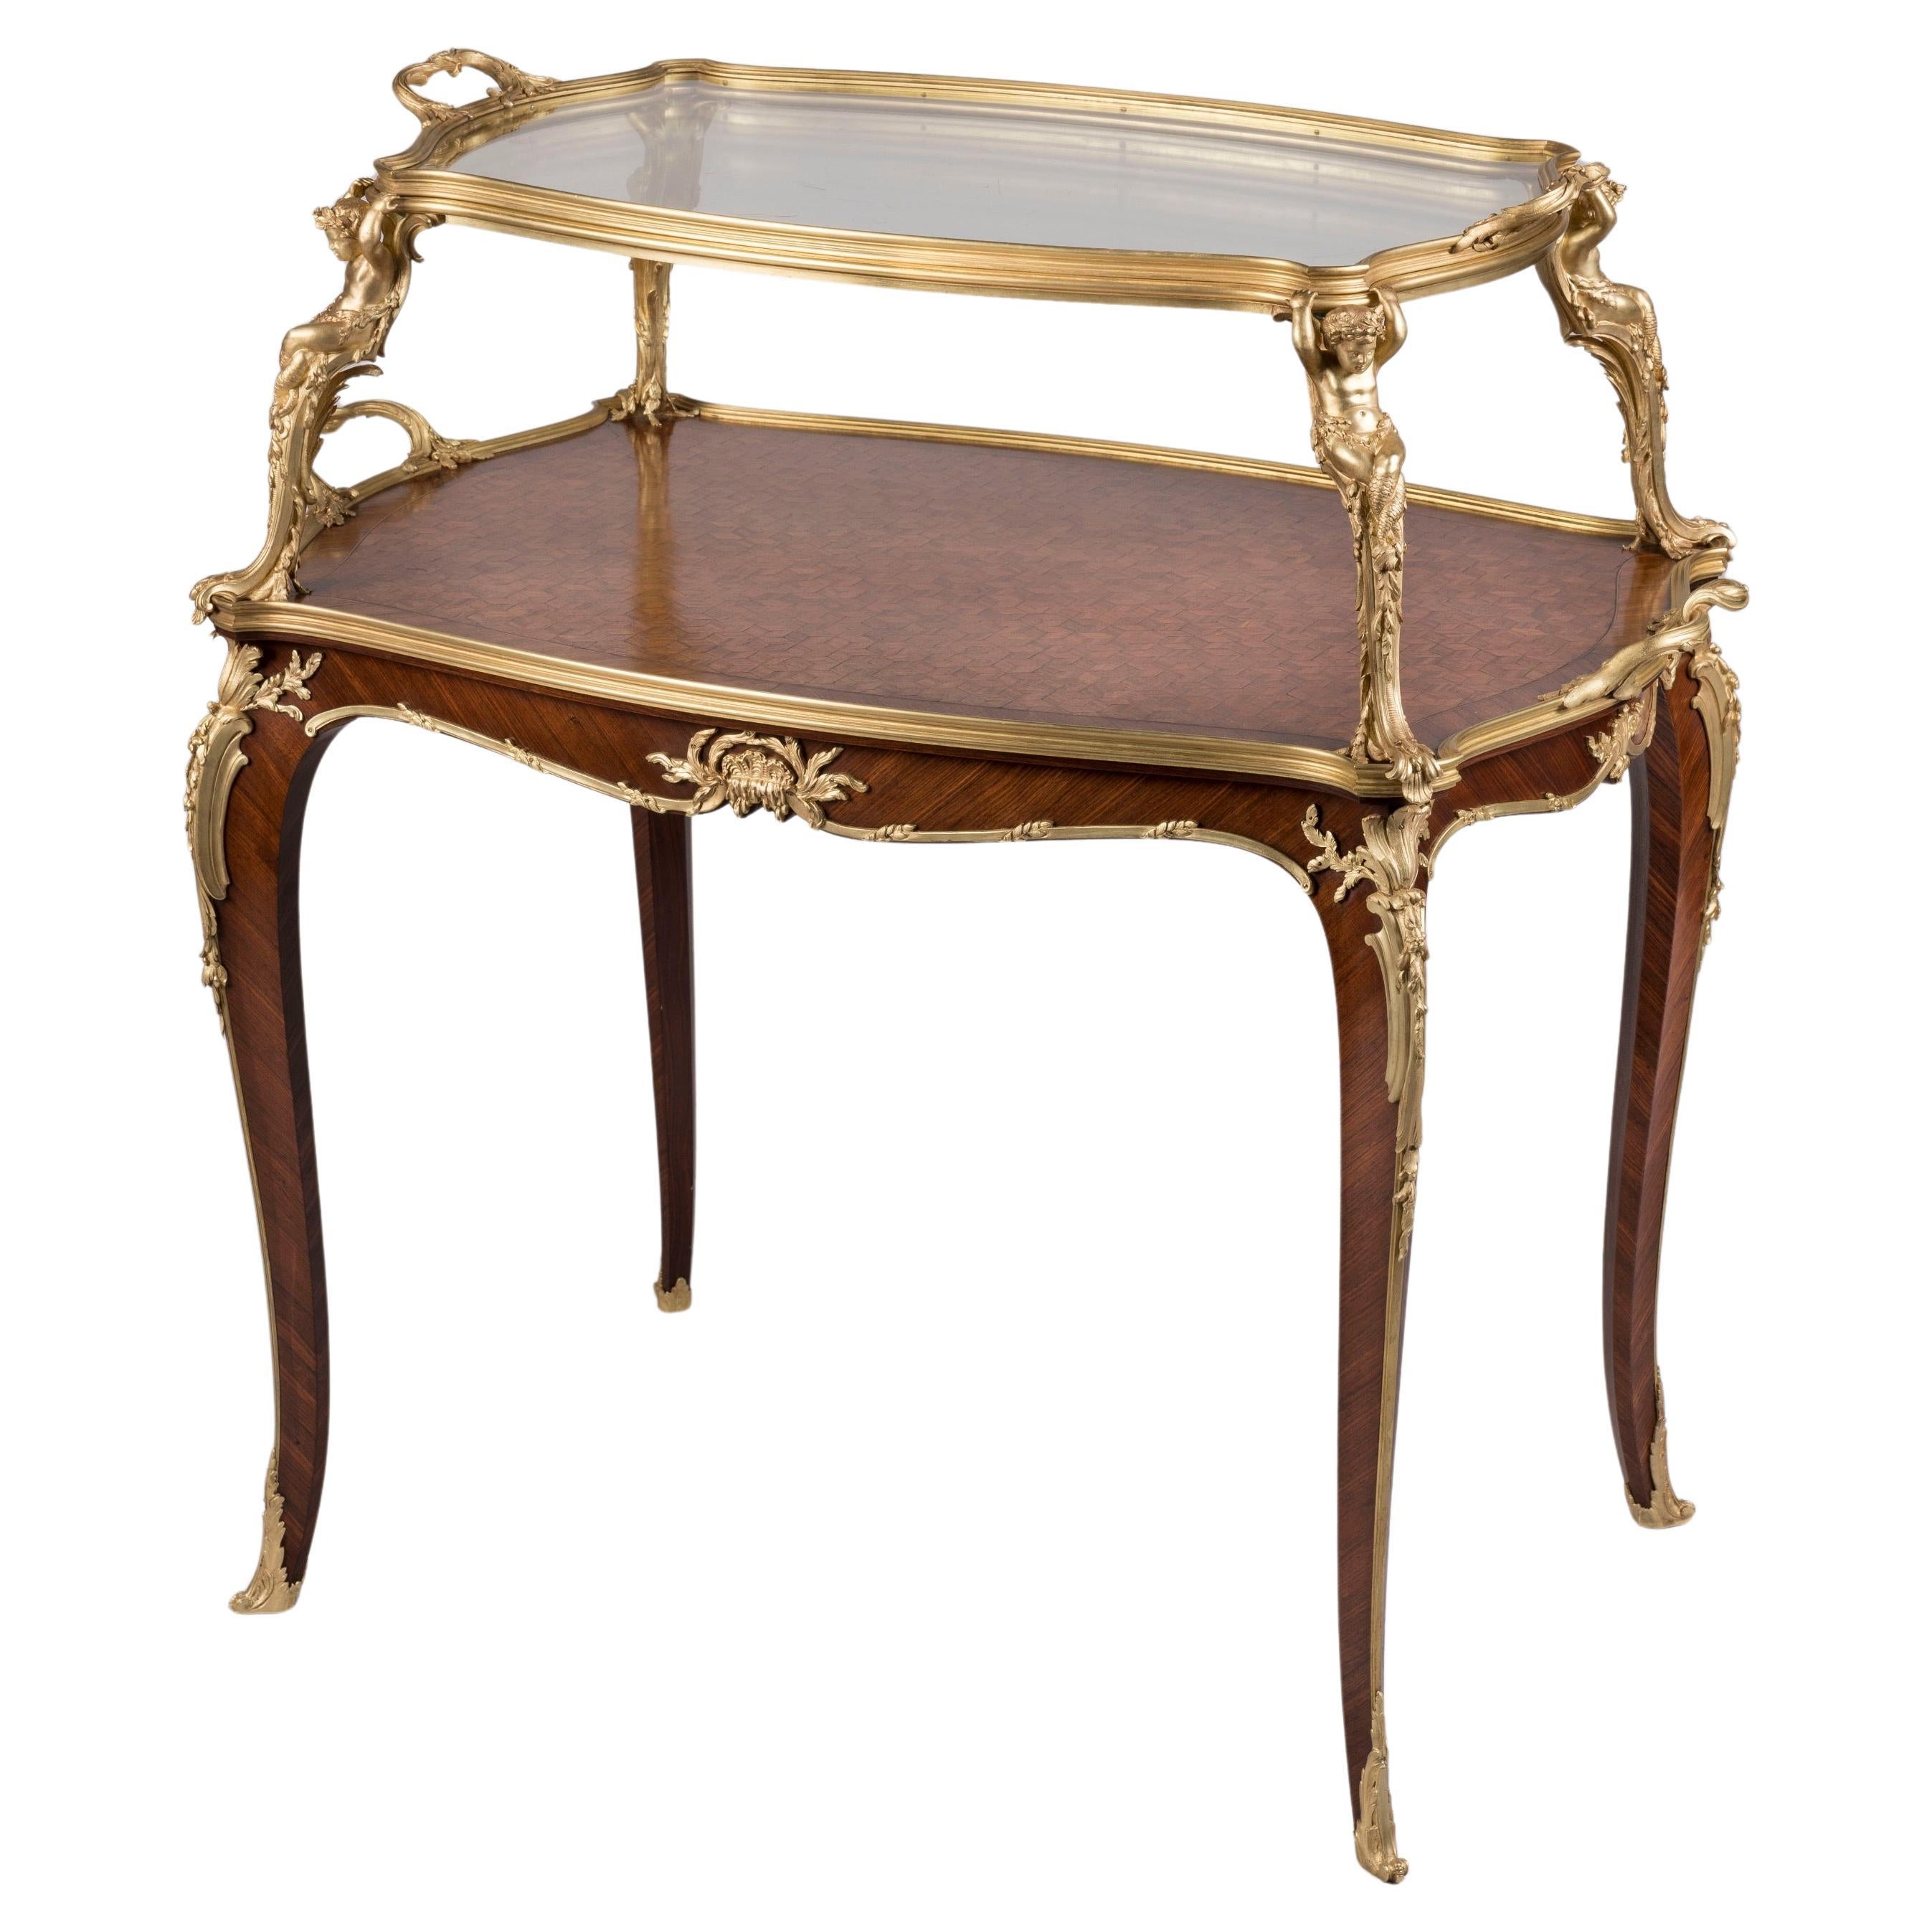 Exceptional 19th Century Kingwood and Ormolu Tray Top Table by François Linke For Sale